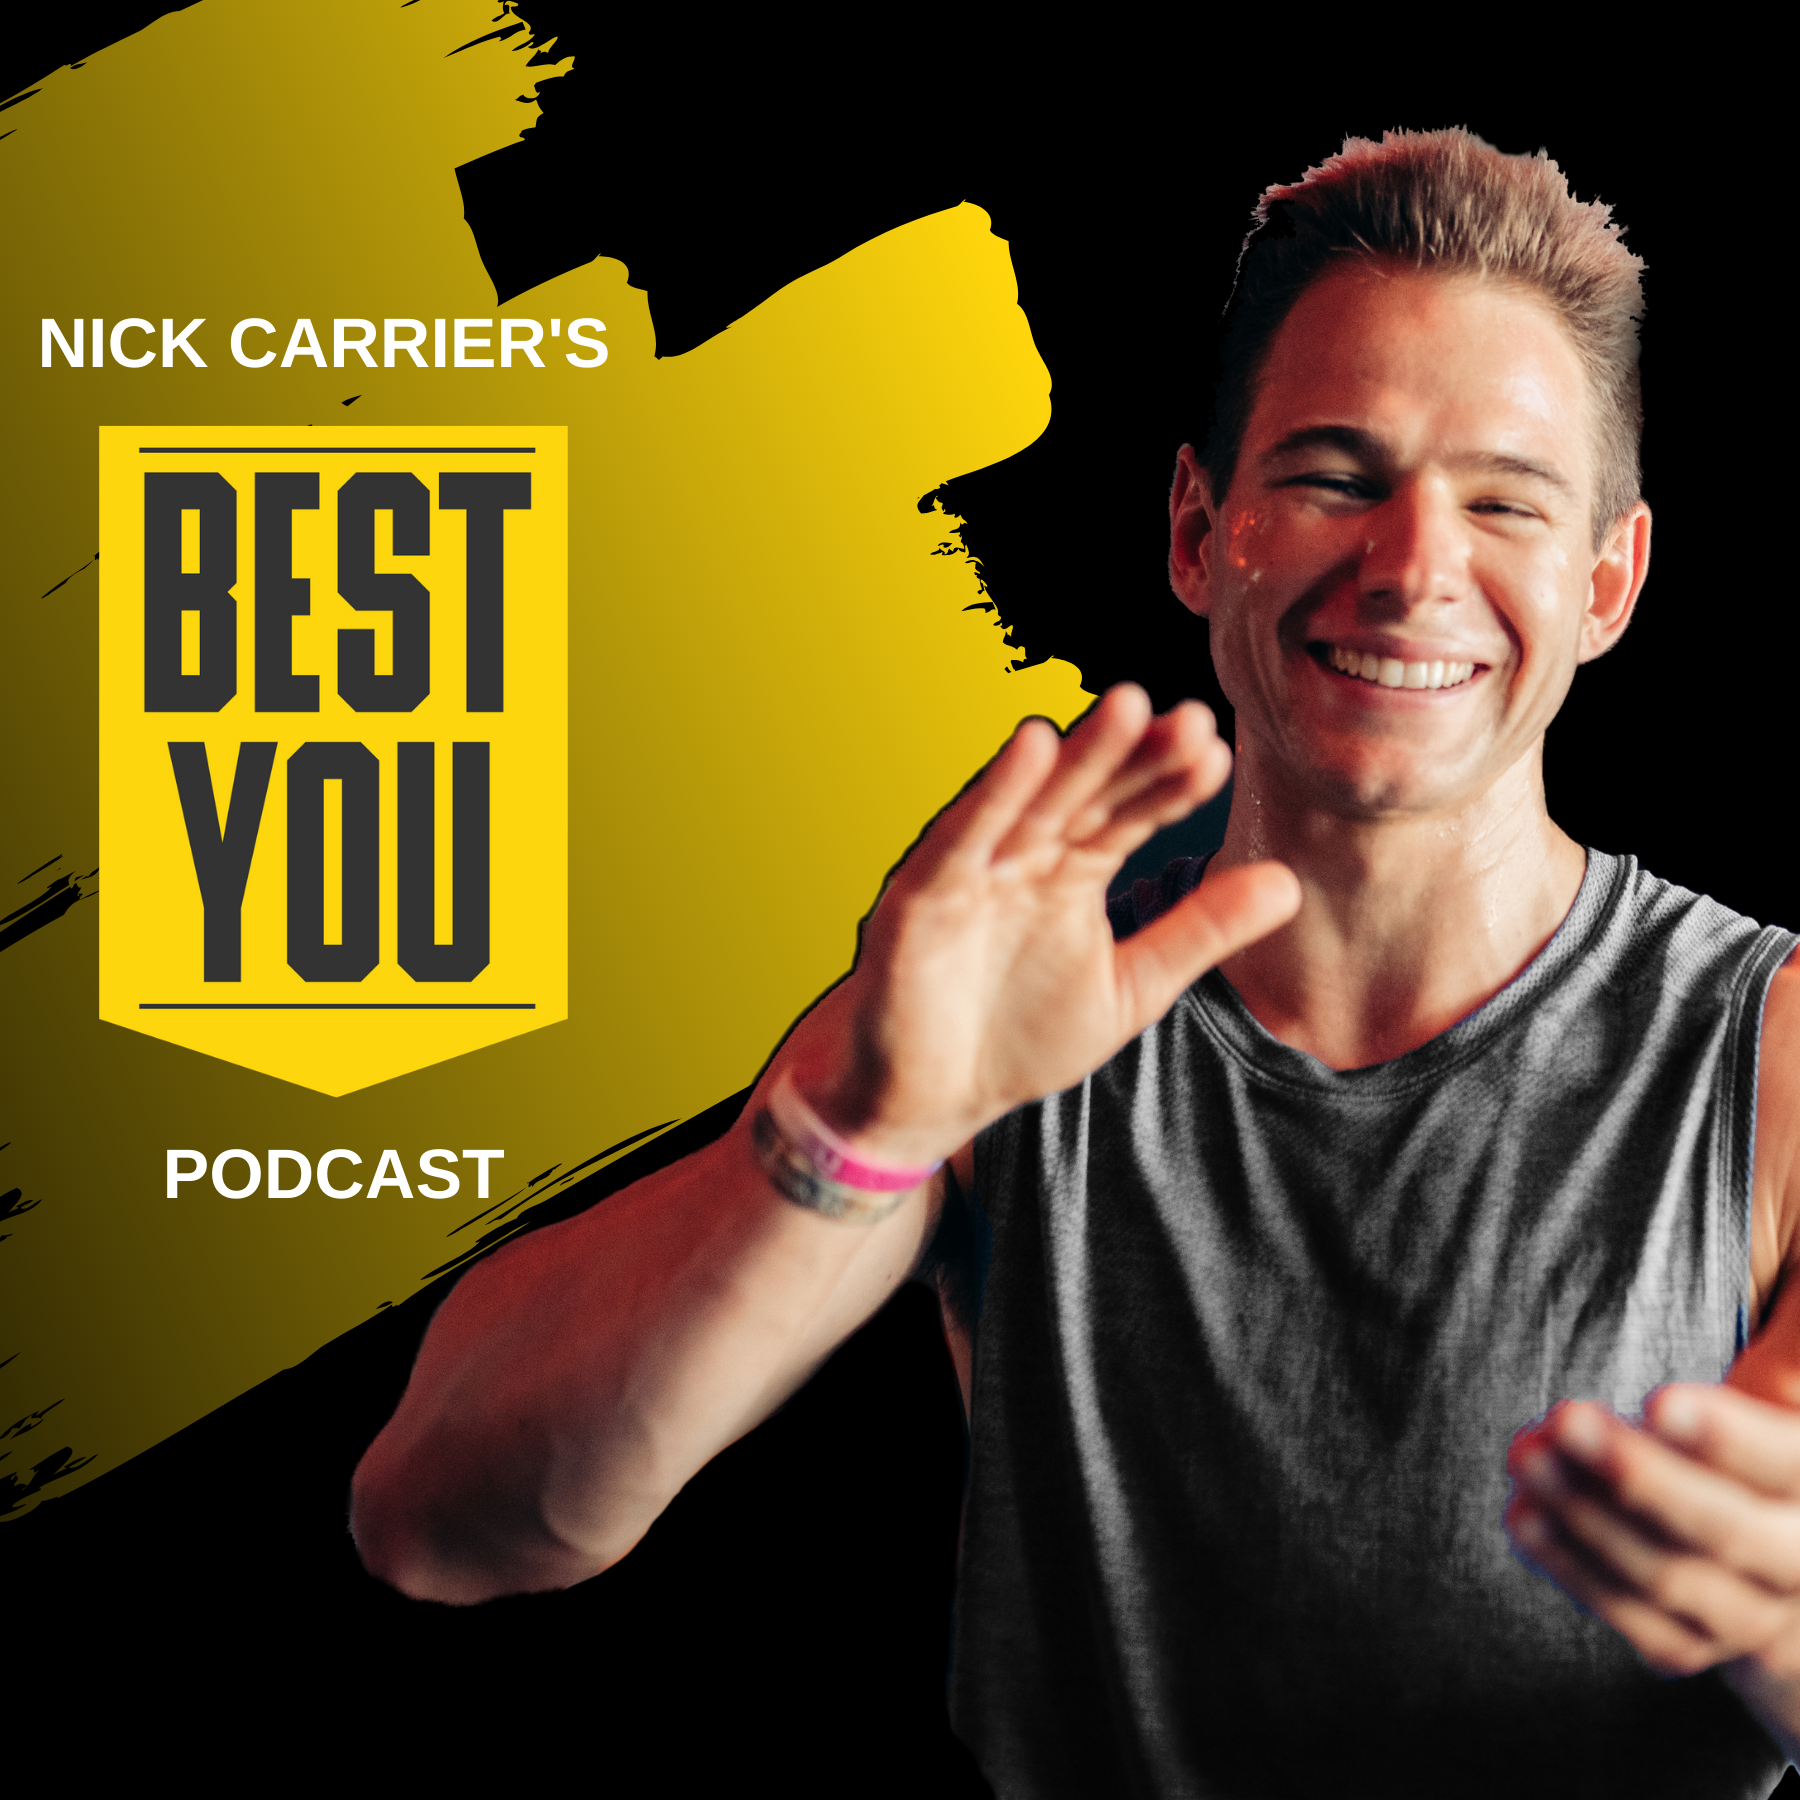 242. Nick's 3 Takeaways - Communicate Your Goals